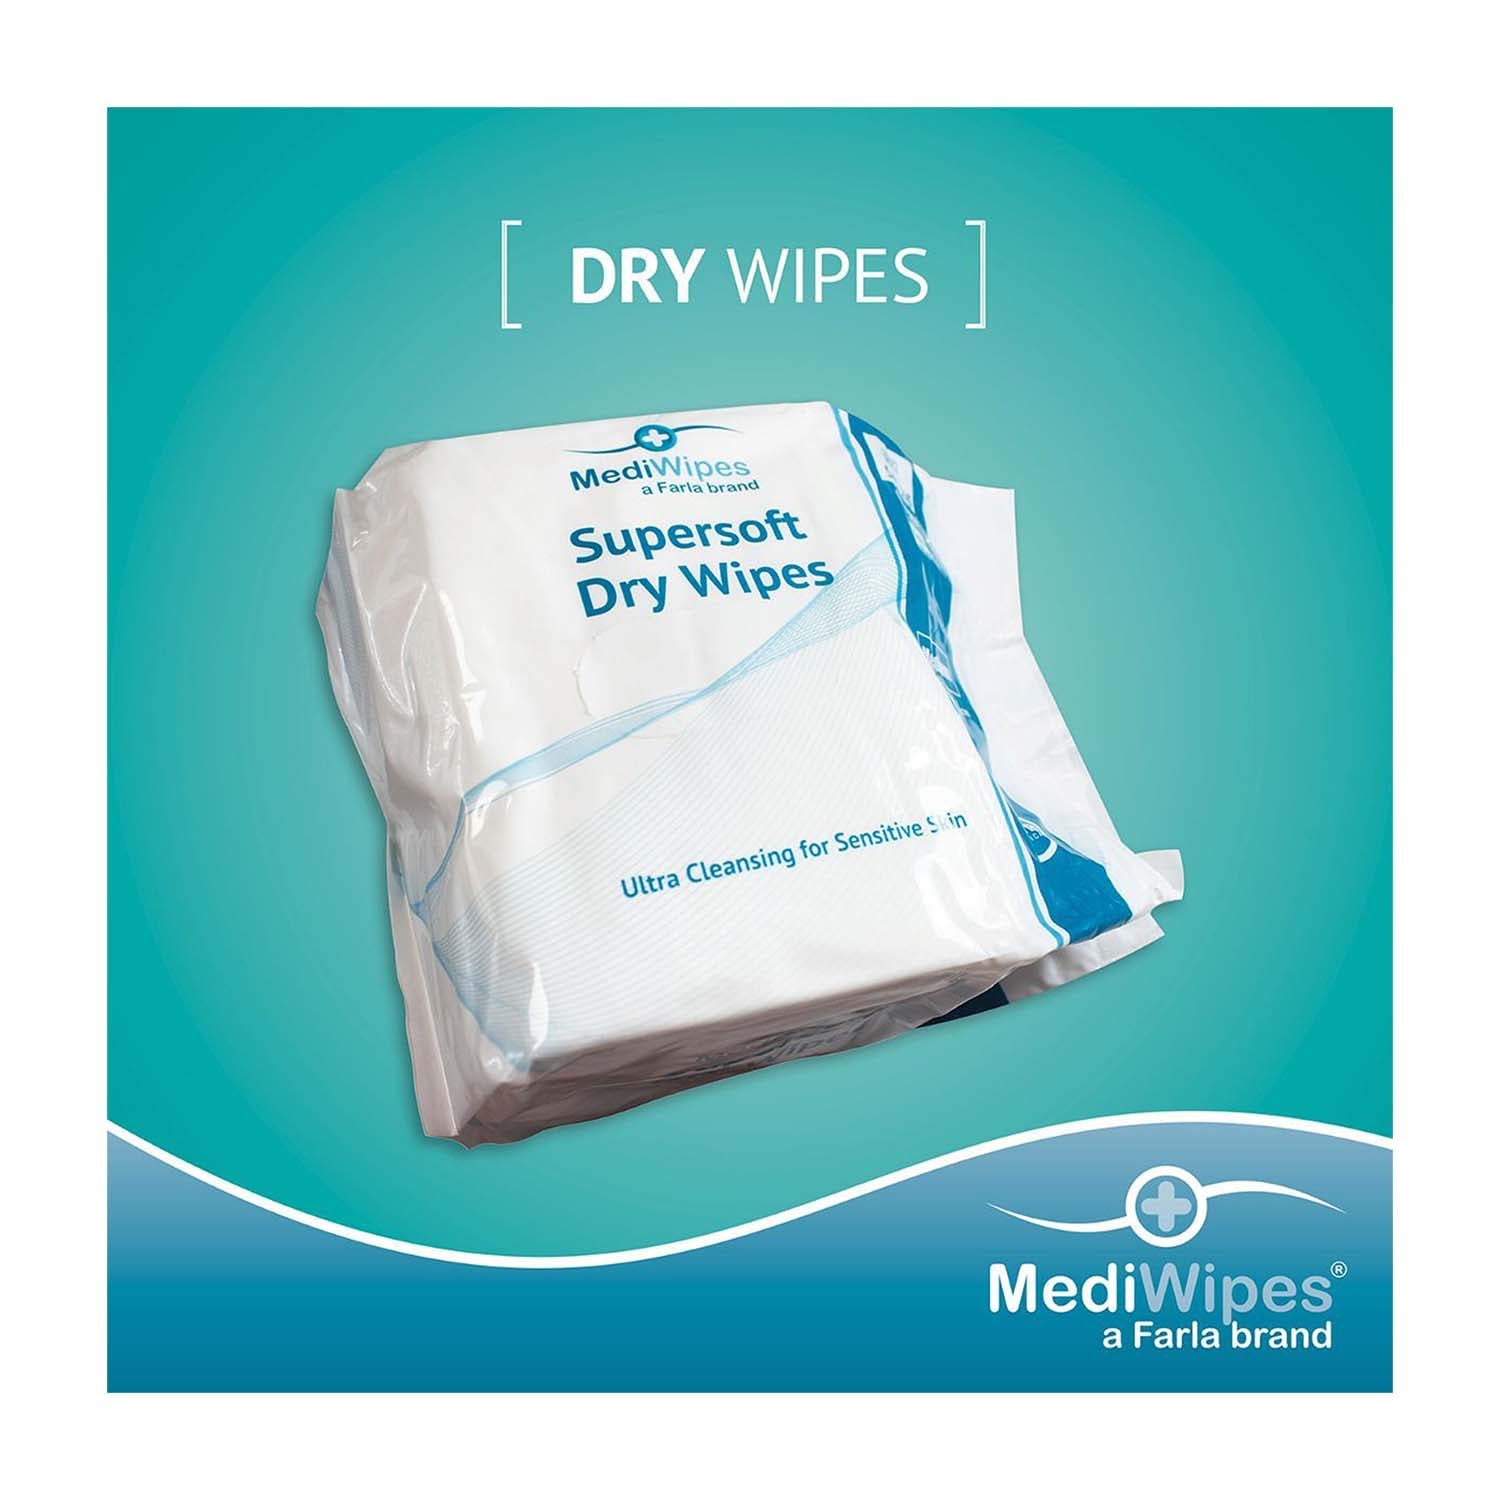 MediWipes Supersoft Dry Wipes | Medium | Pack of 80 (3)